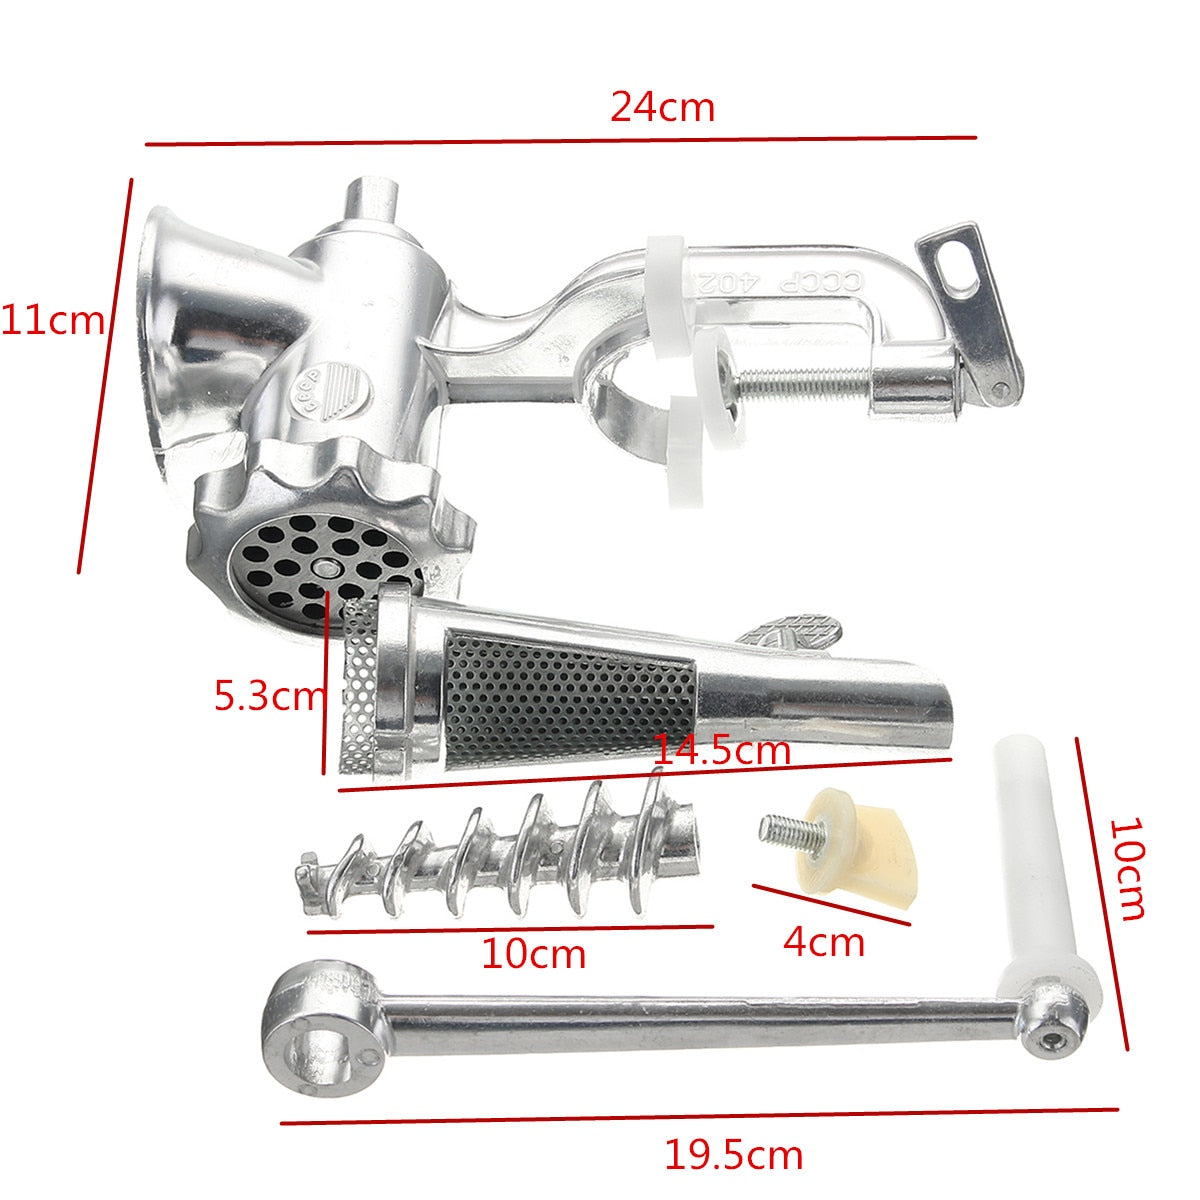 2-in-1 Household Manual Hand Operated Juice Squeezer and Meat Grinder